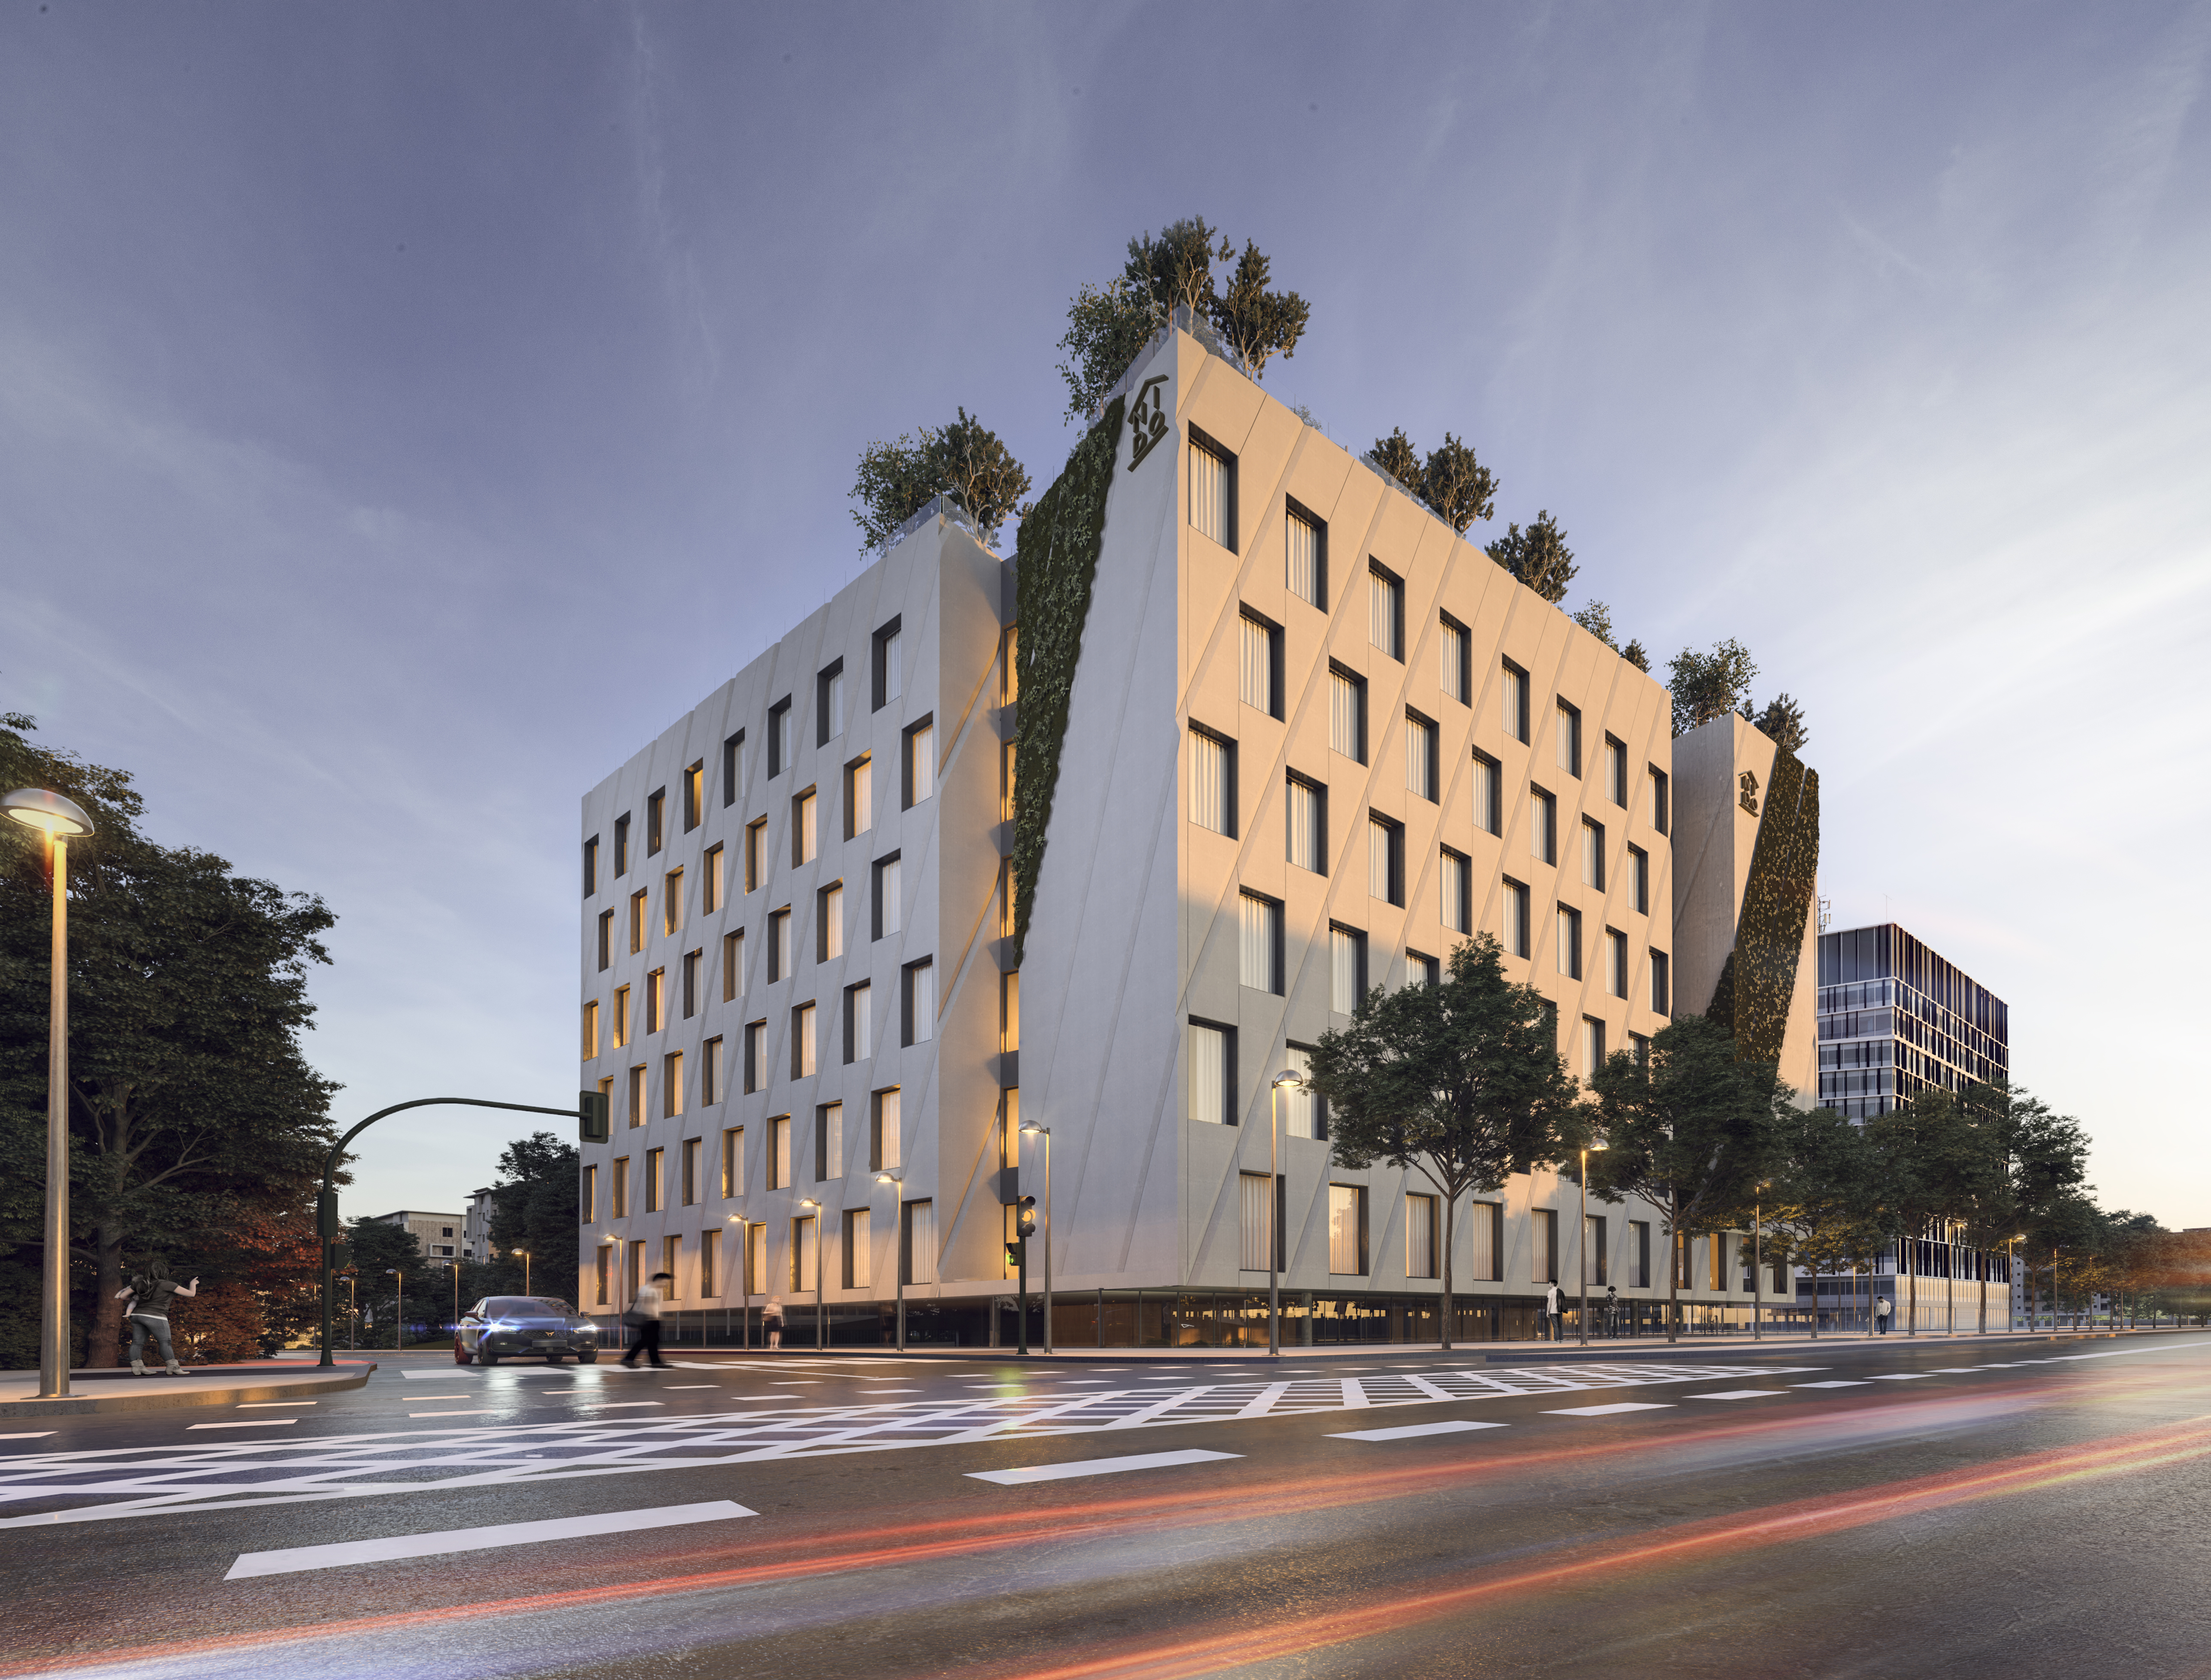 Round Hill acquires a student housing of 250 beds in Valencia